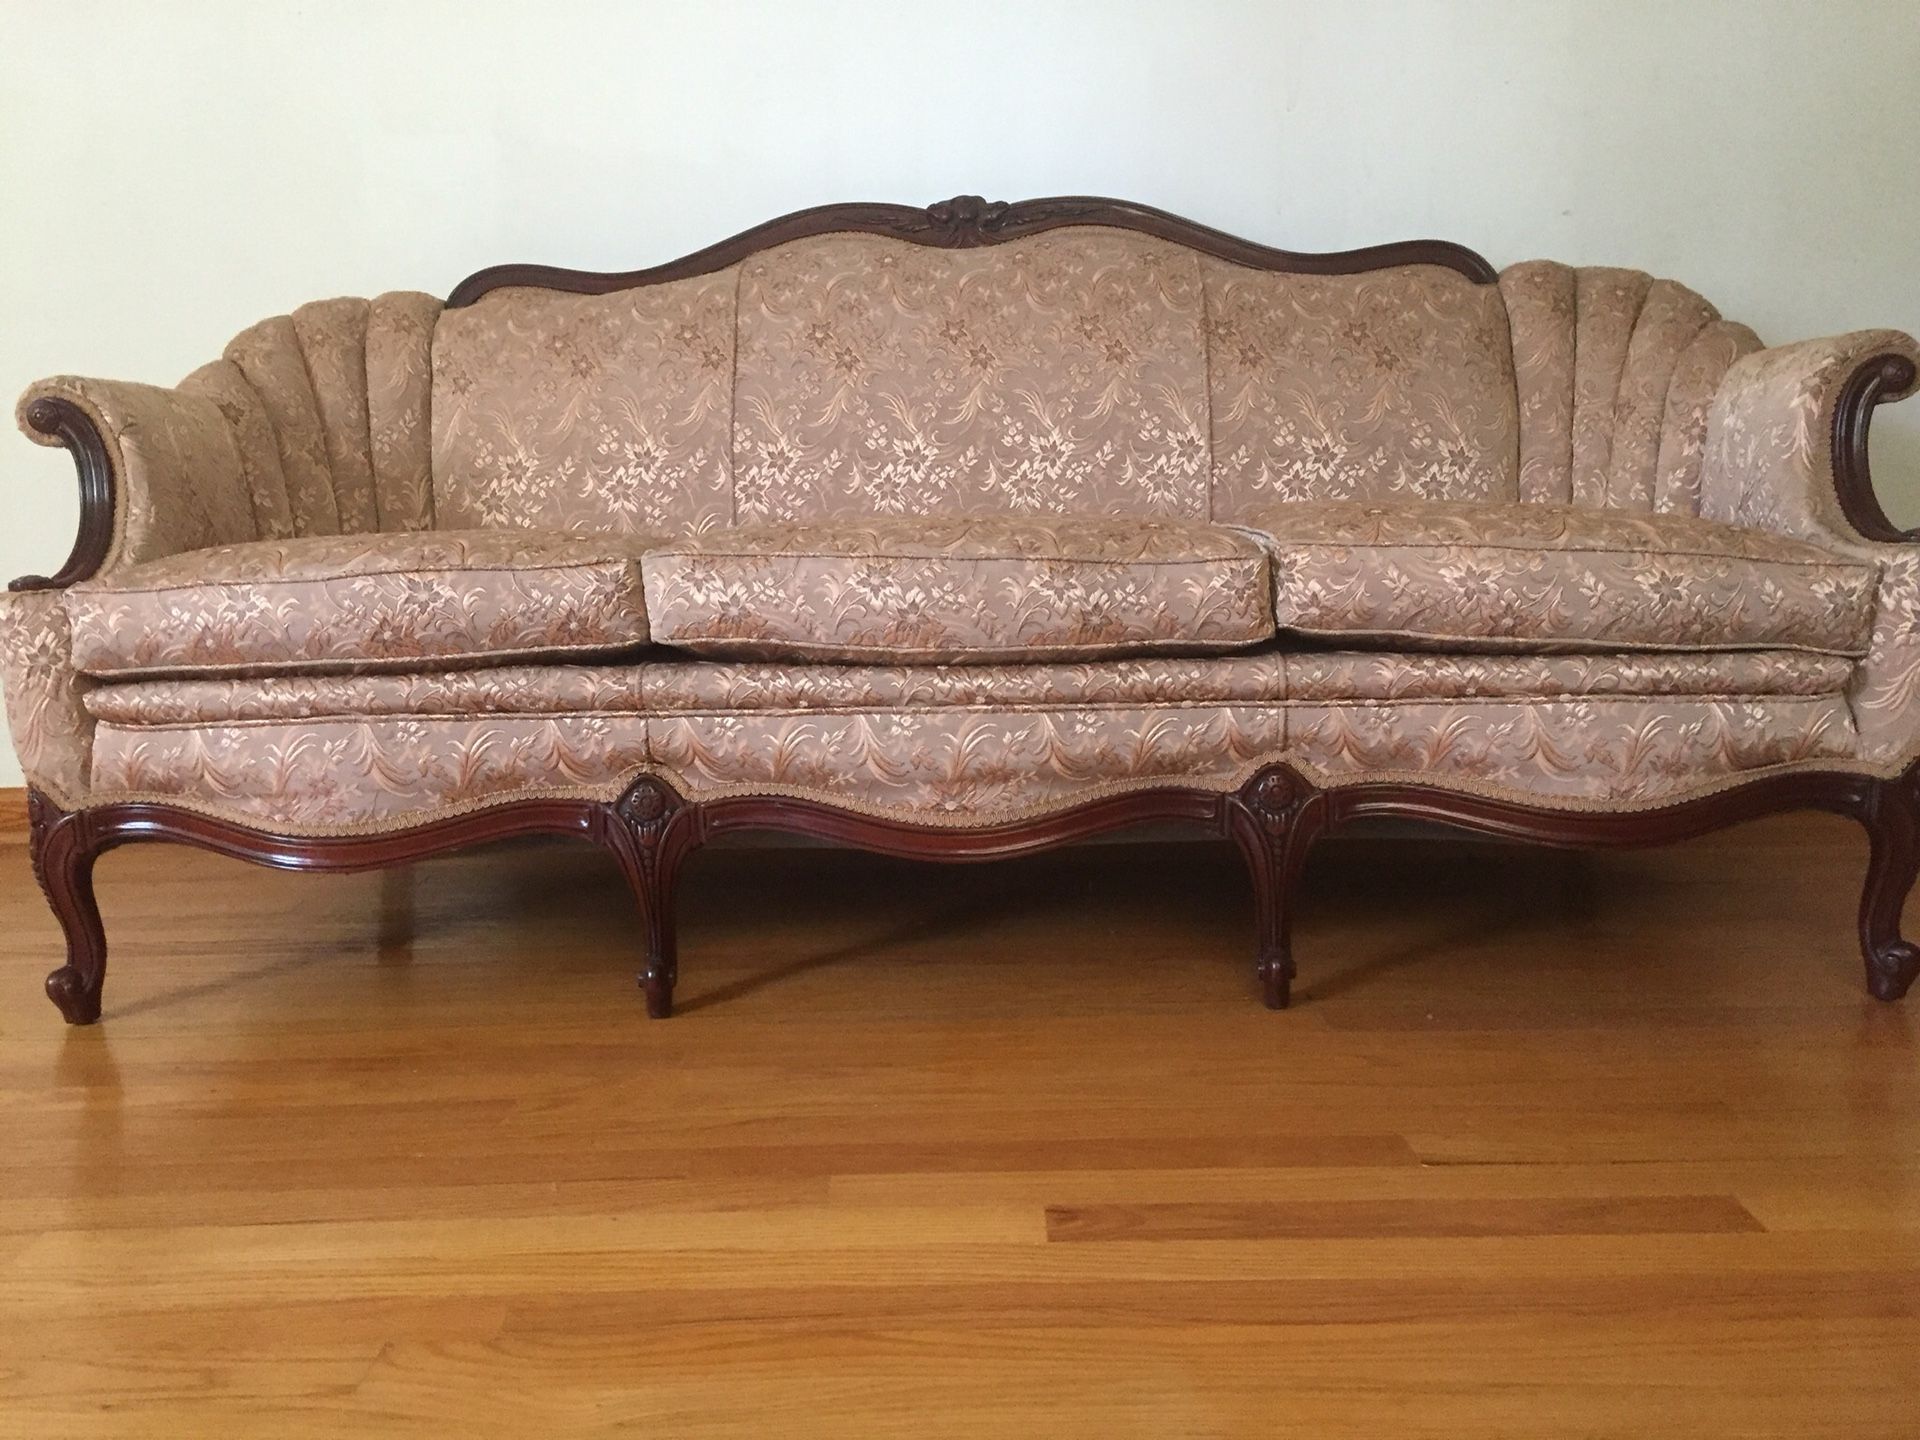 TRADITIONAL PROVINCIAL STYLE SOFA